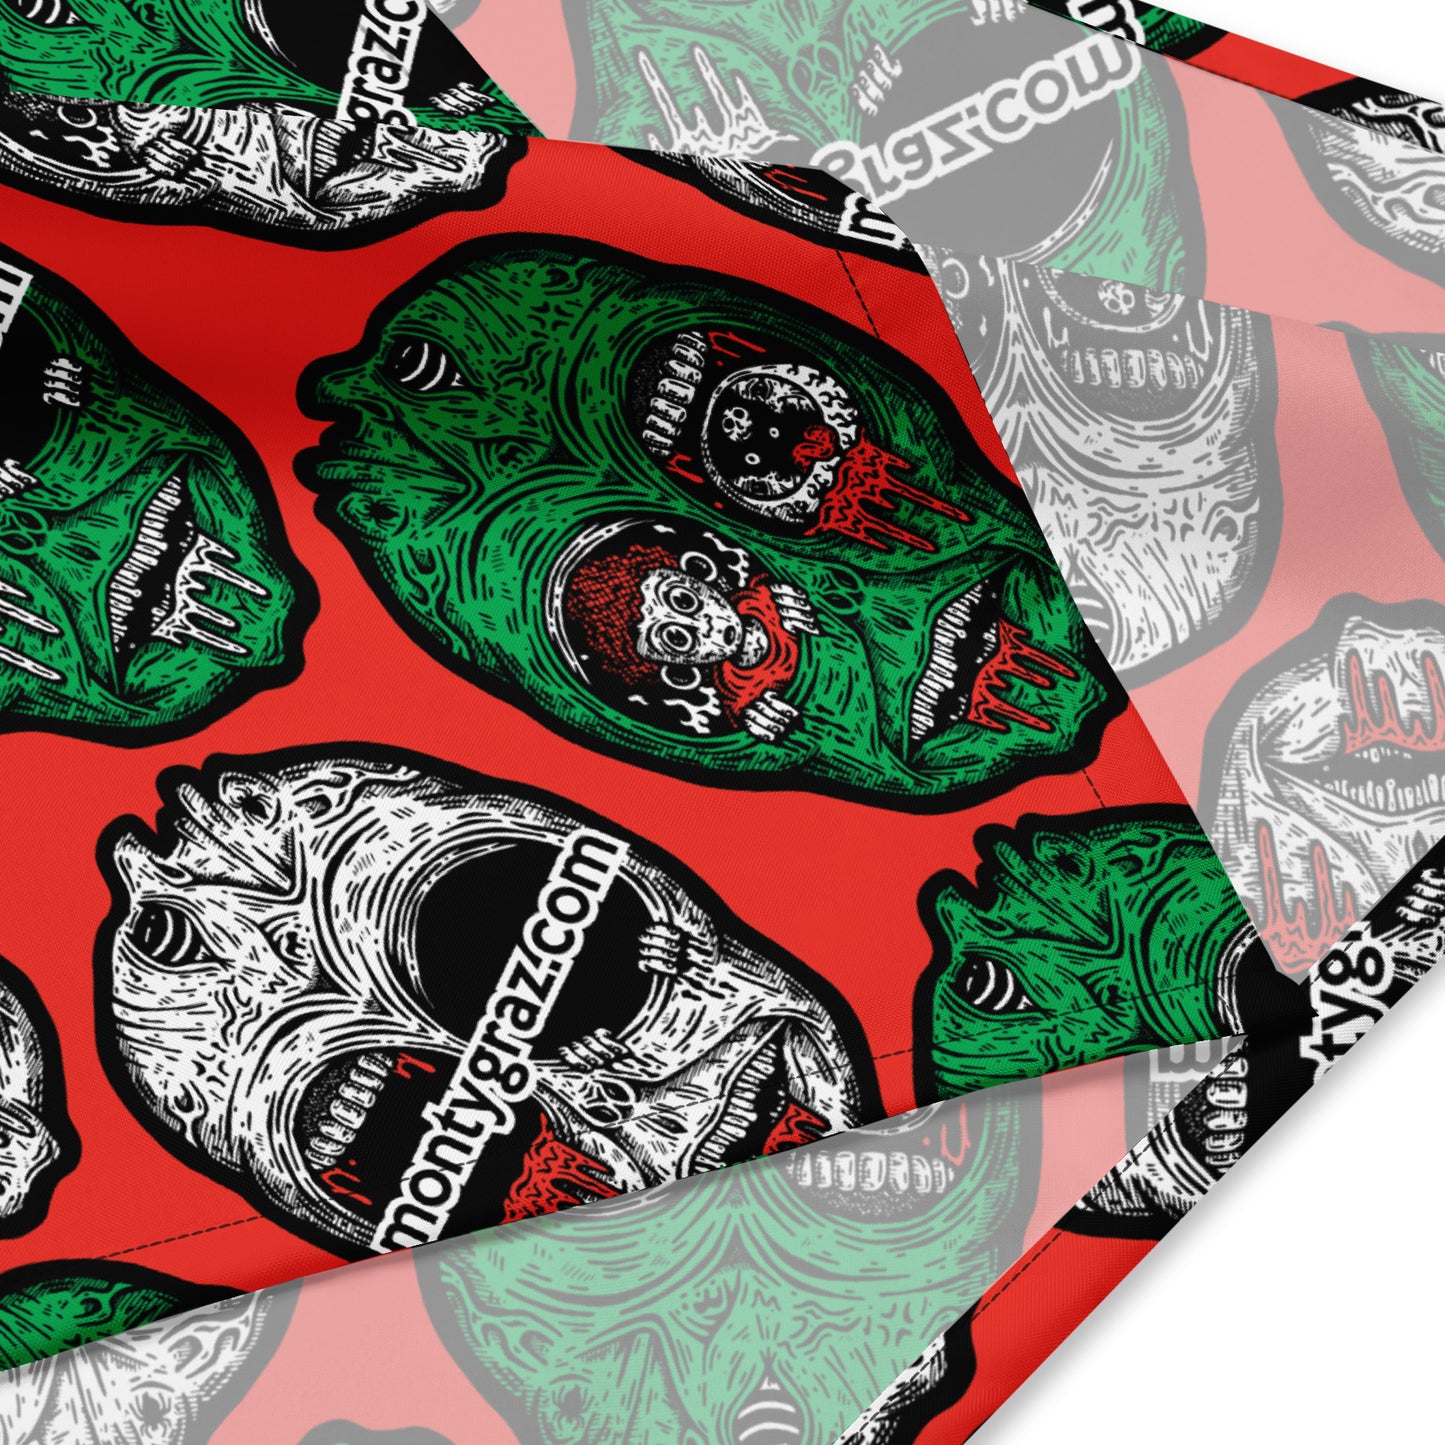 Zed Sees All Repeater Bandana - Red